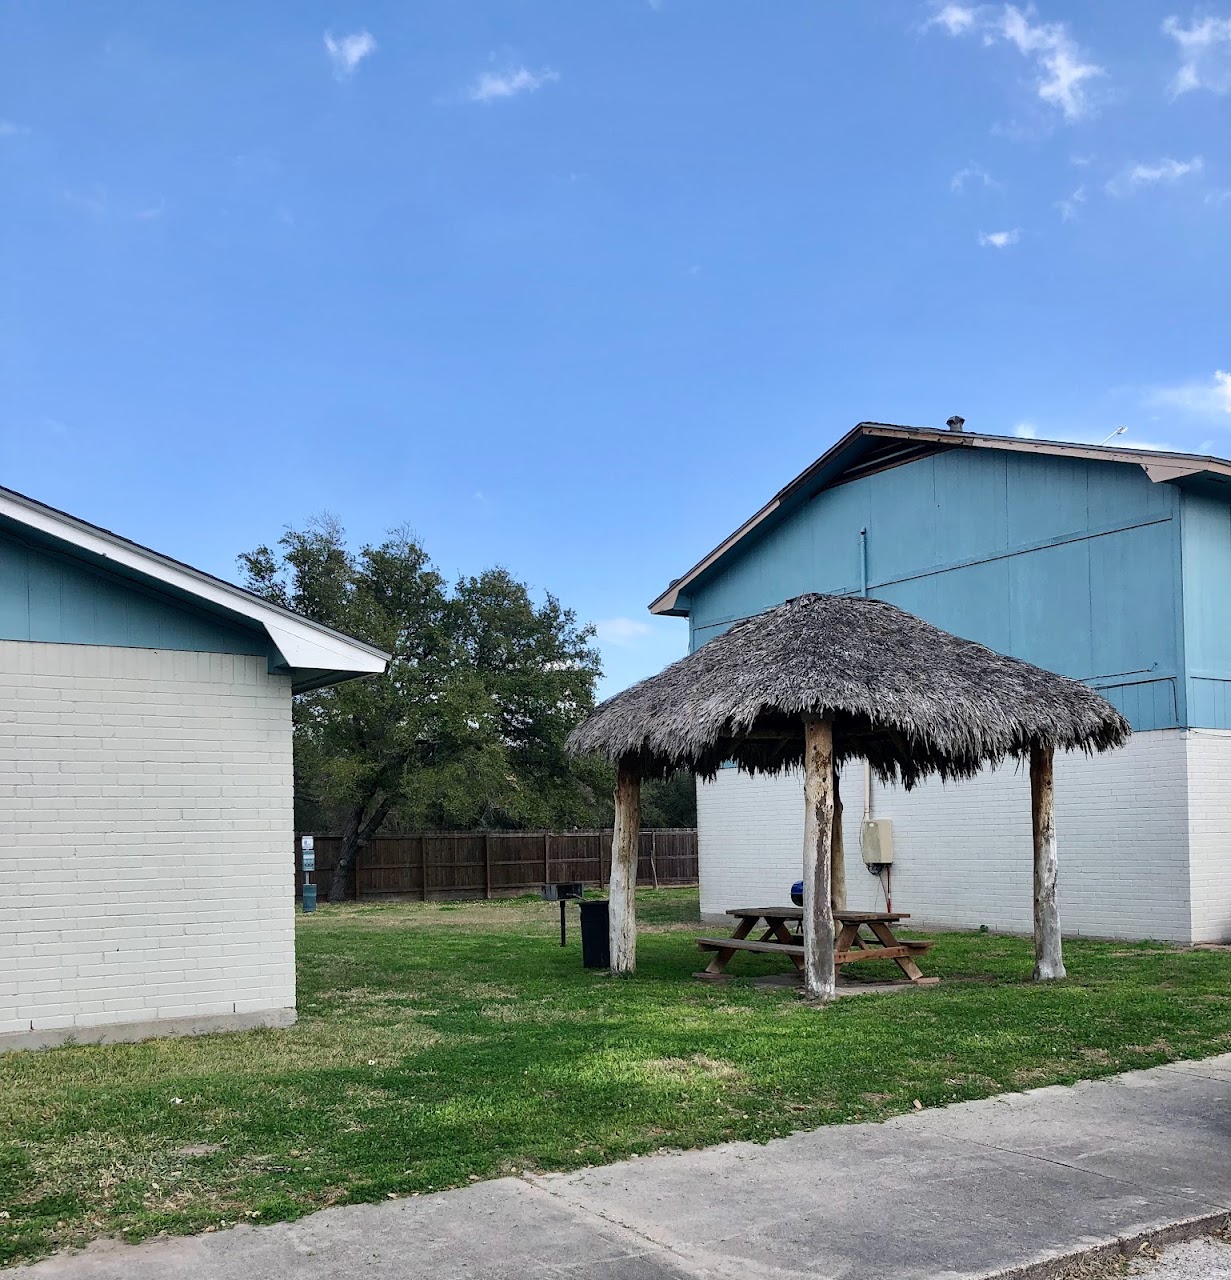 Photo of BAYTREE APTS. Affordable housing located at 2050 S SAUNDERS ST ARANSAS PASS, TX 78336